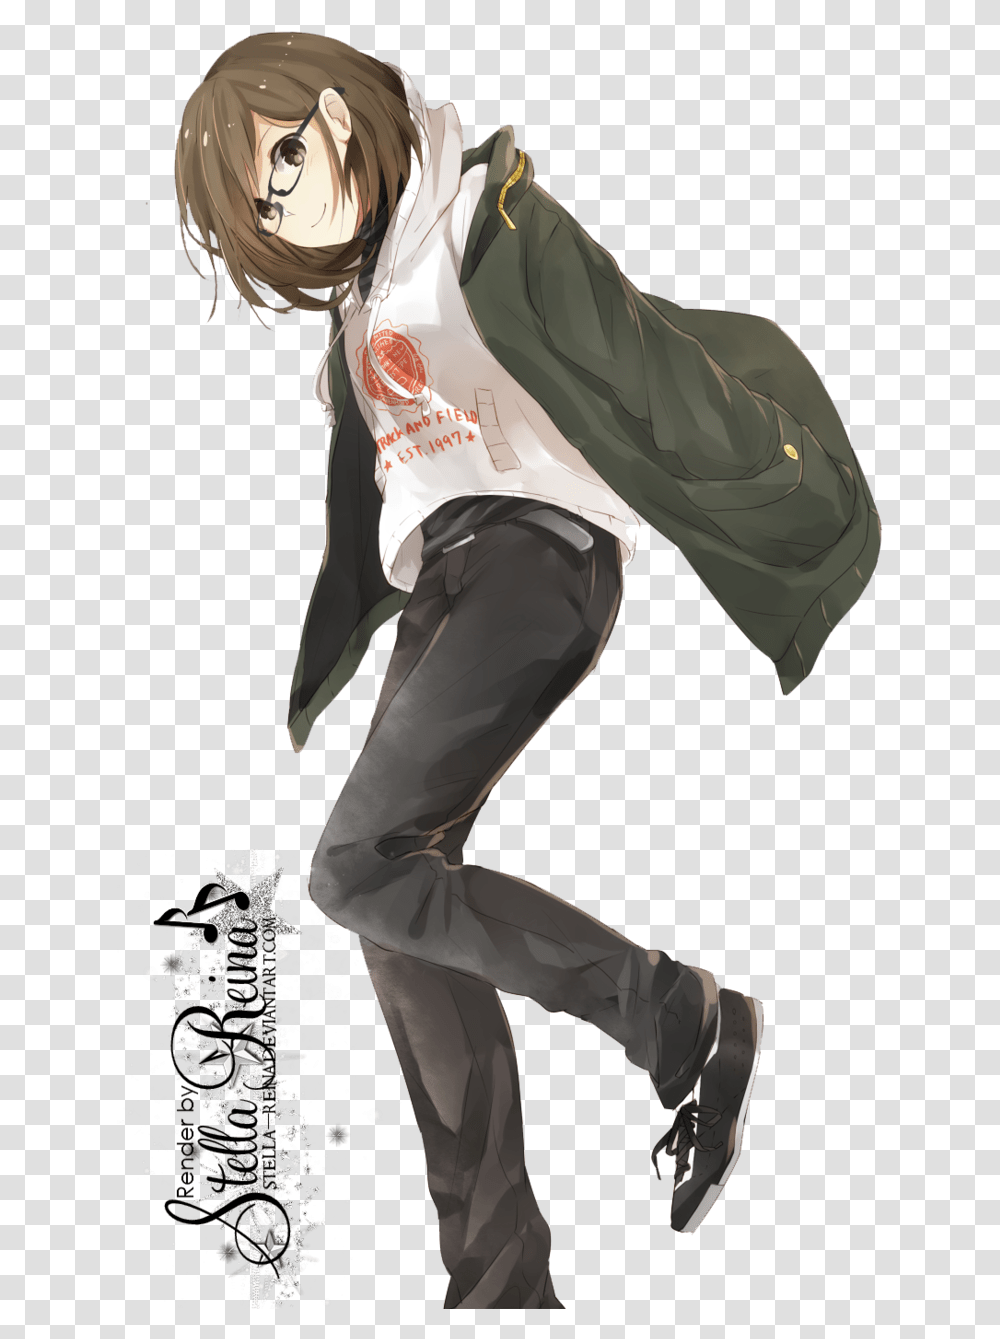 Anime Girl With Brown Hair And Glasses Search Result Cartoon, Sleeve, Pants, Footwear Transparent Png